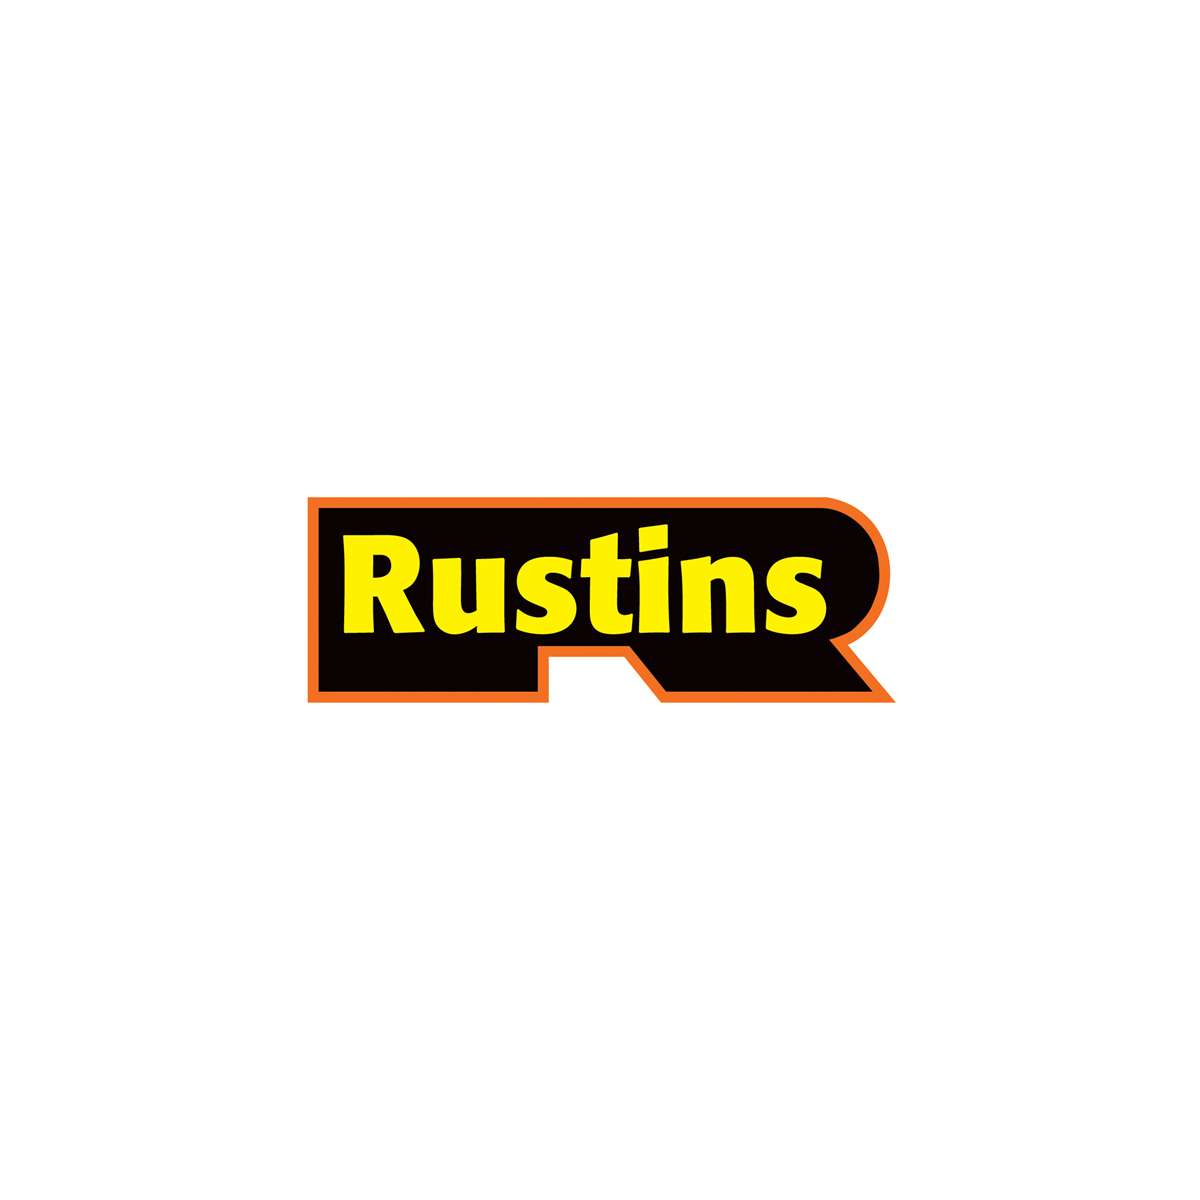 Where to buy Rustins Online